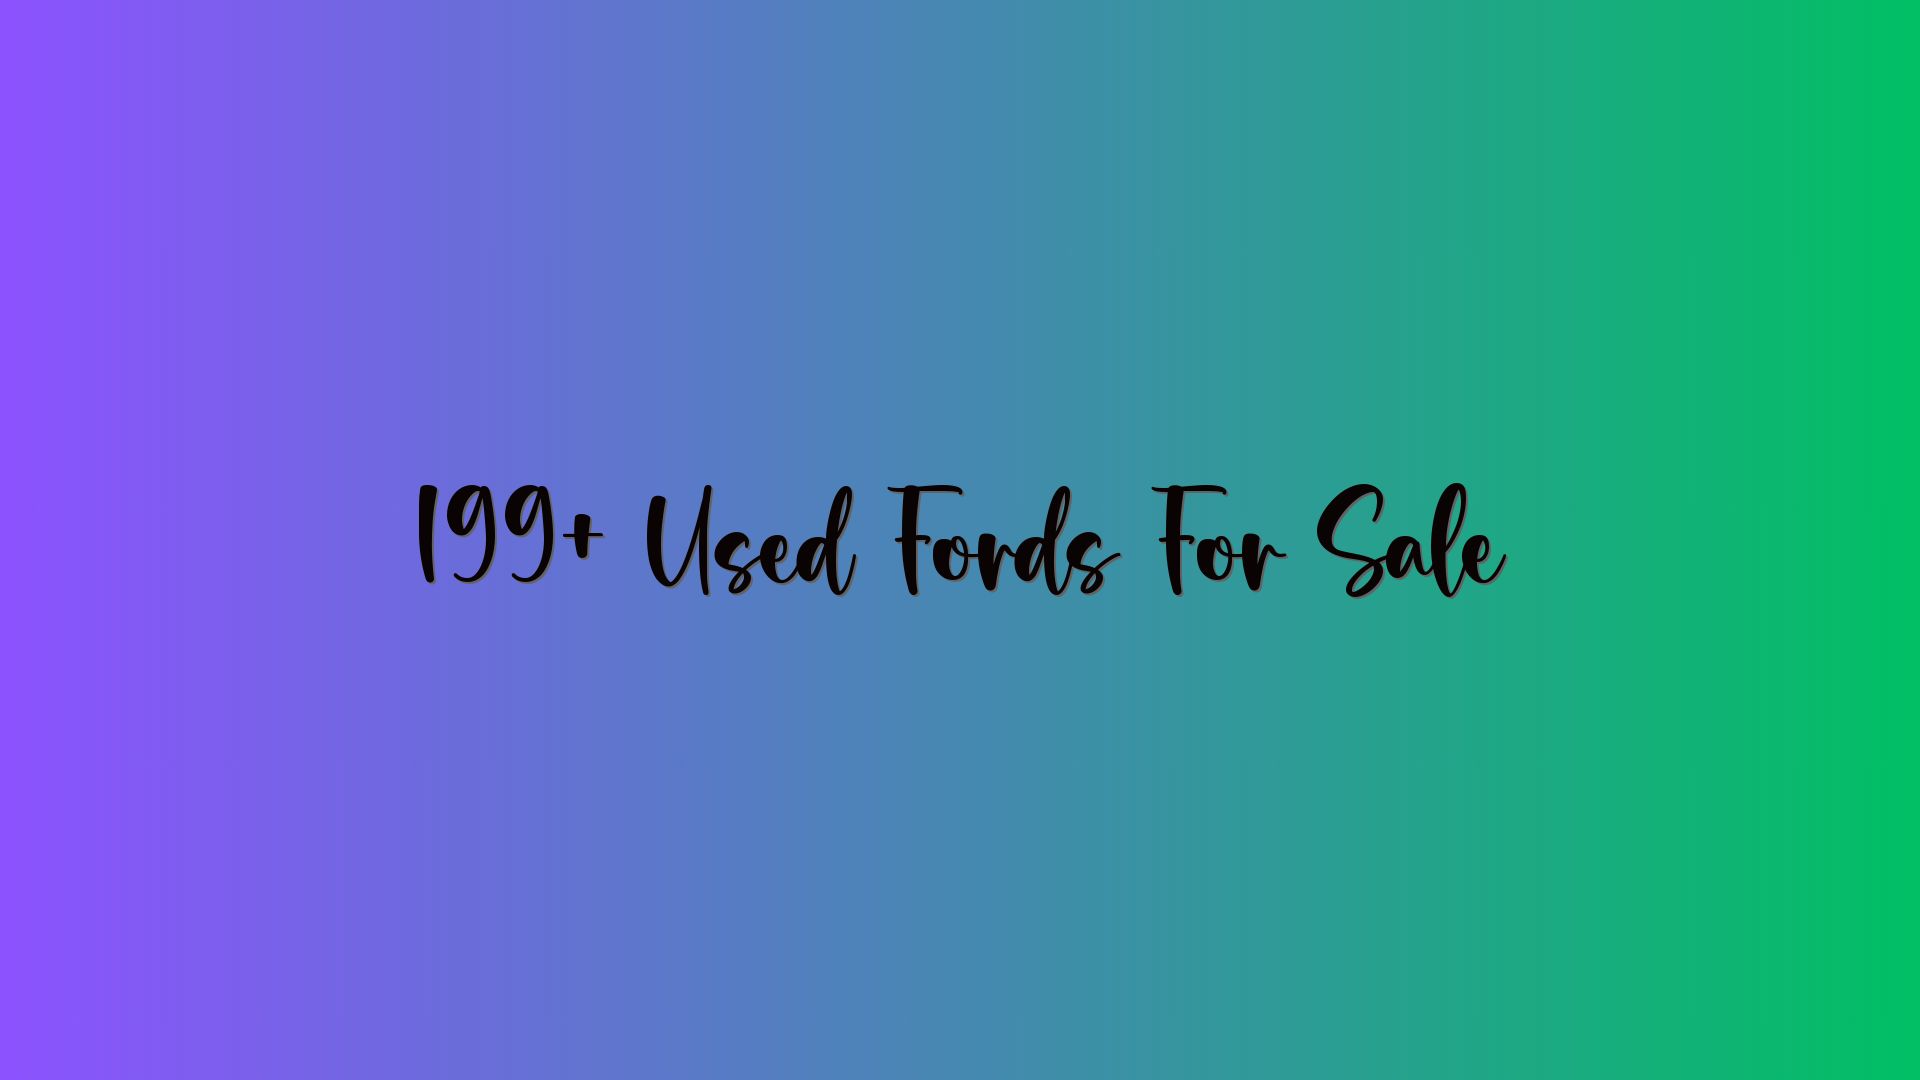 199+ Used Fords For Sale